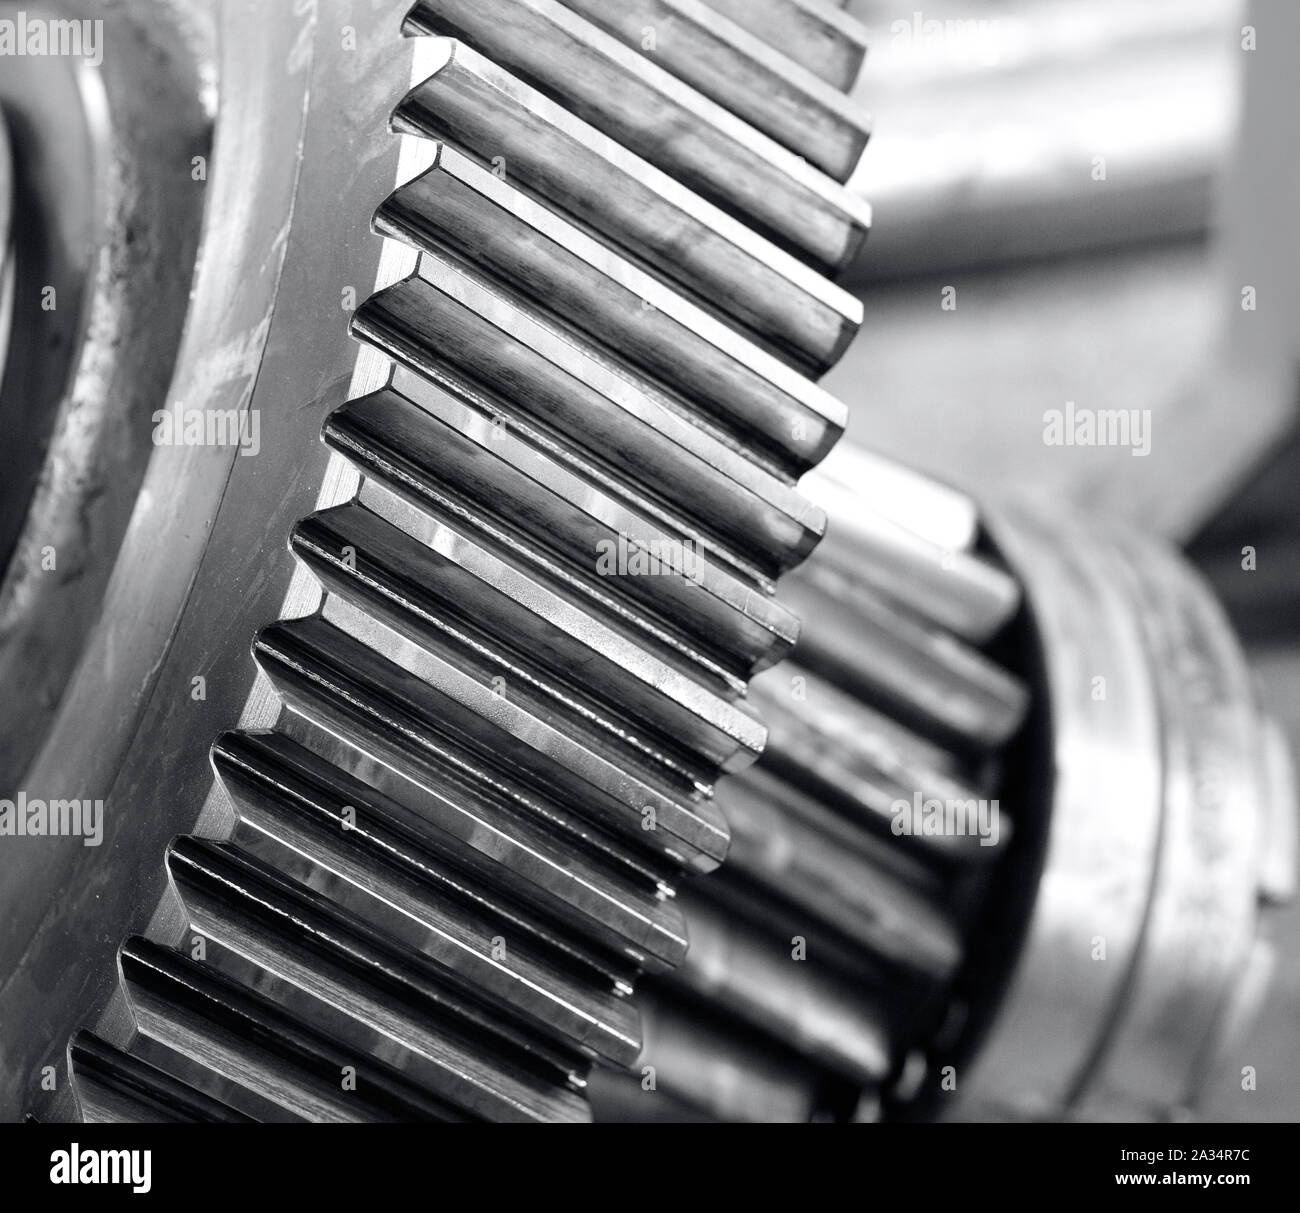 cogwheel of a big gearbox, detail of the teeths mechanized, industrial photo in black and white Stock Photo